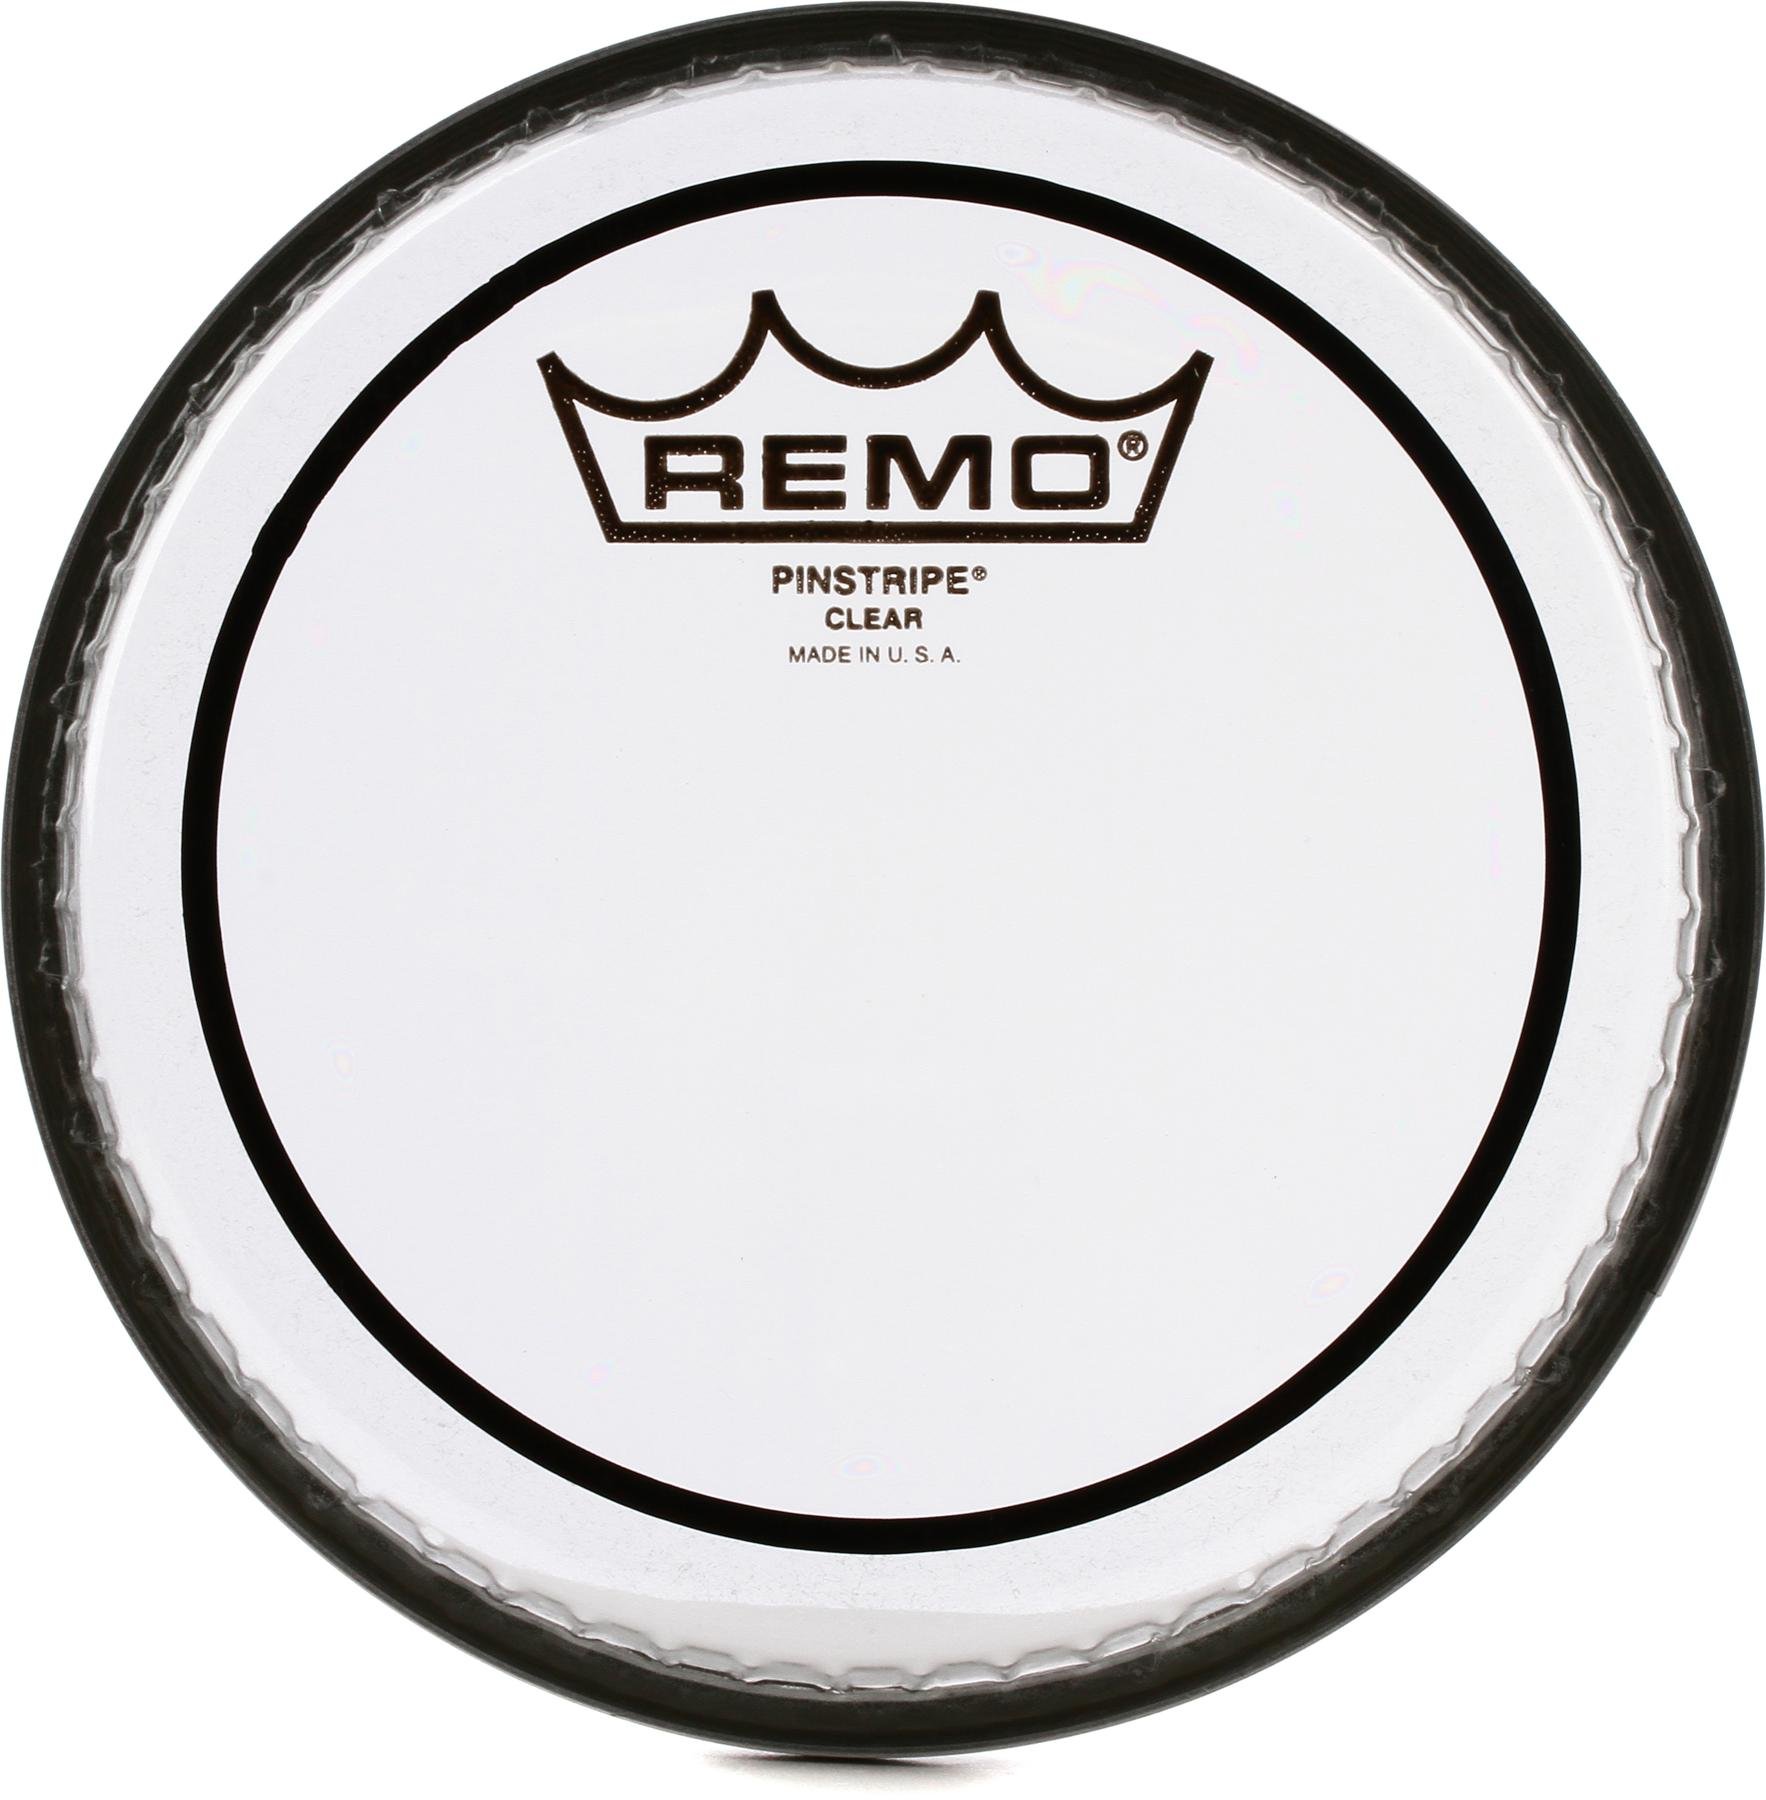 remo drums